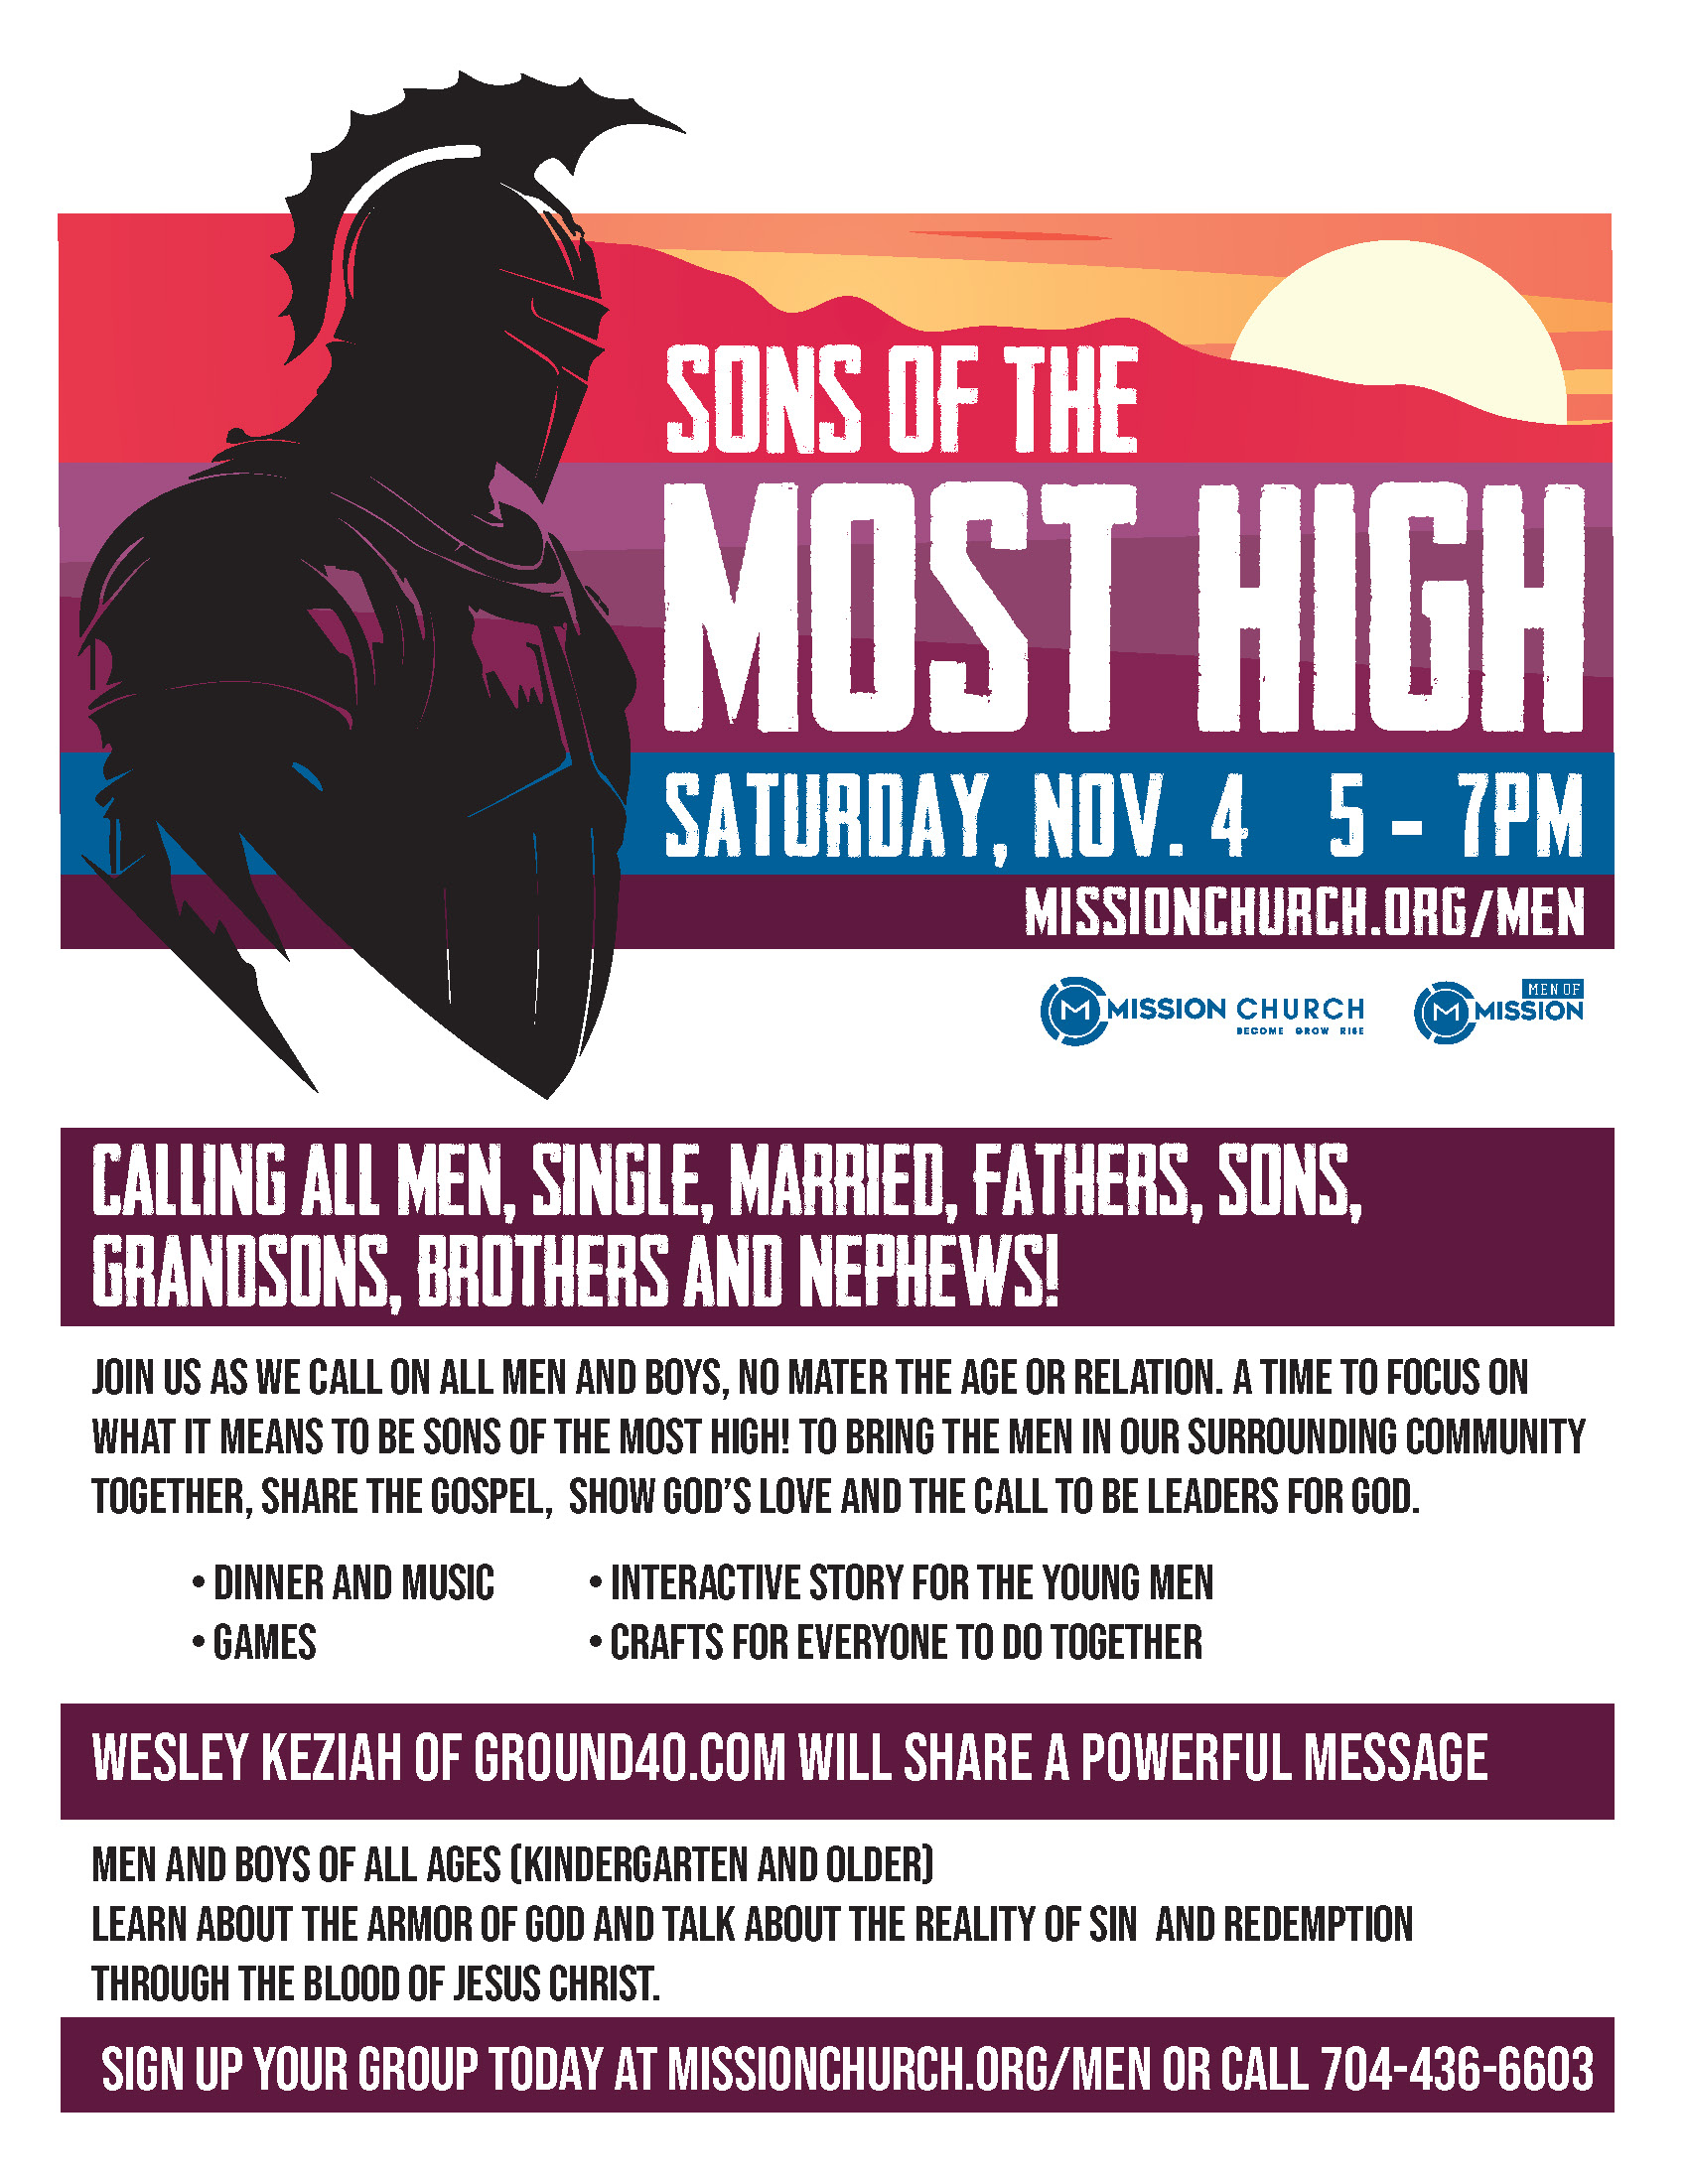 Sons of most high event flier